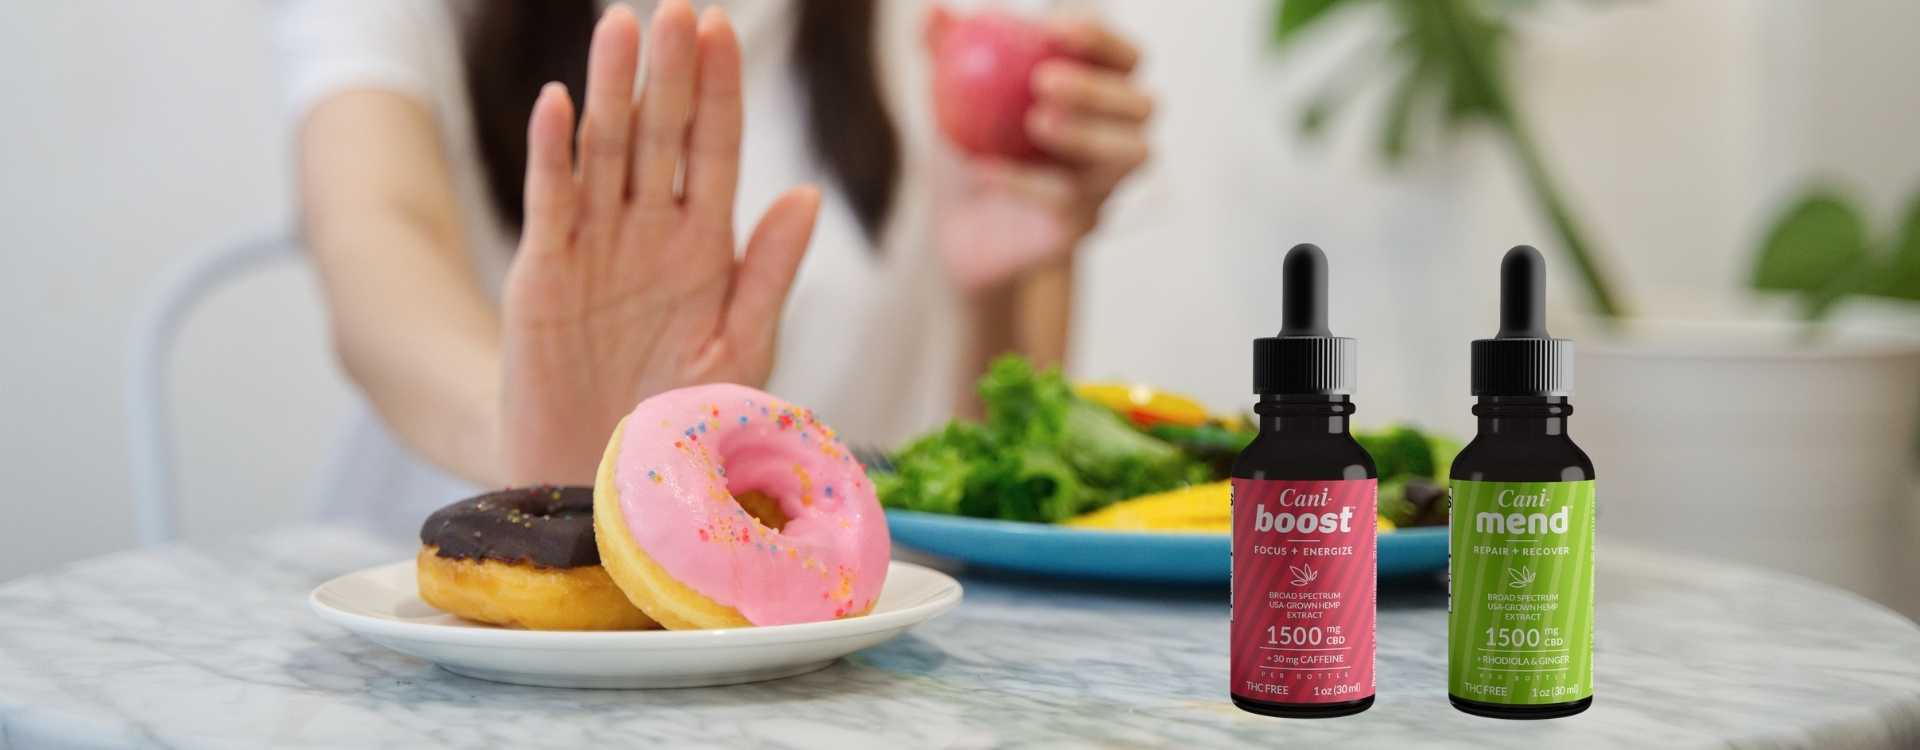 Two CBD oil tinctures between a healthy salad and two donuts